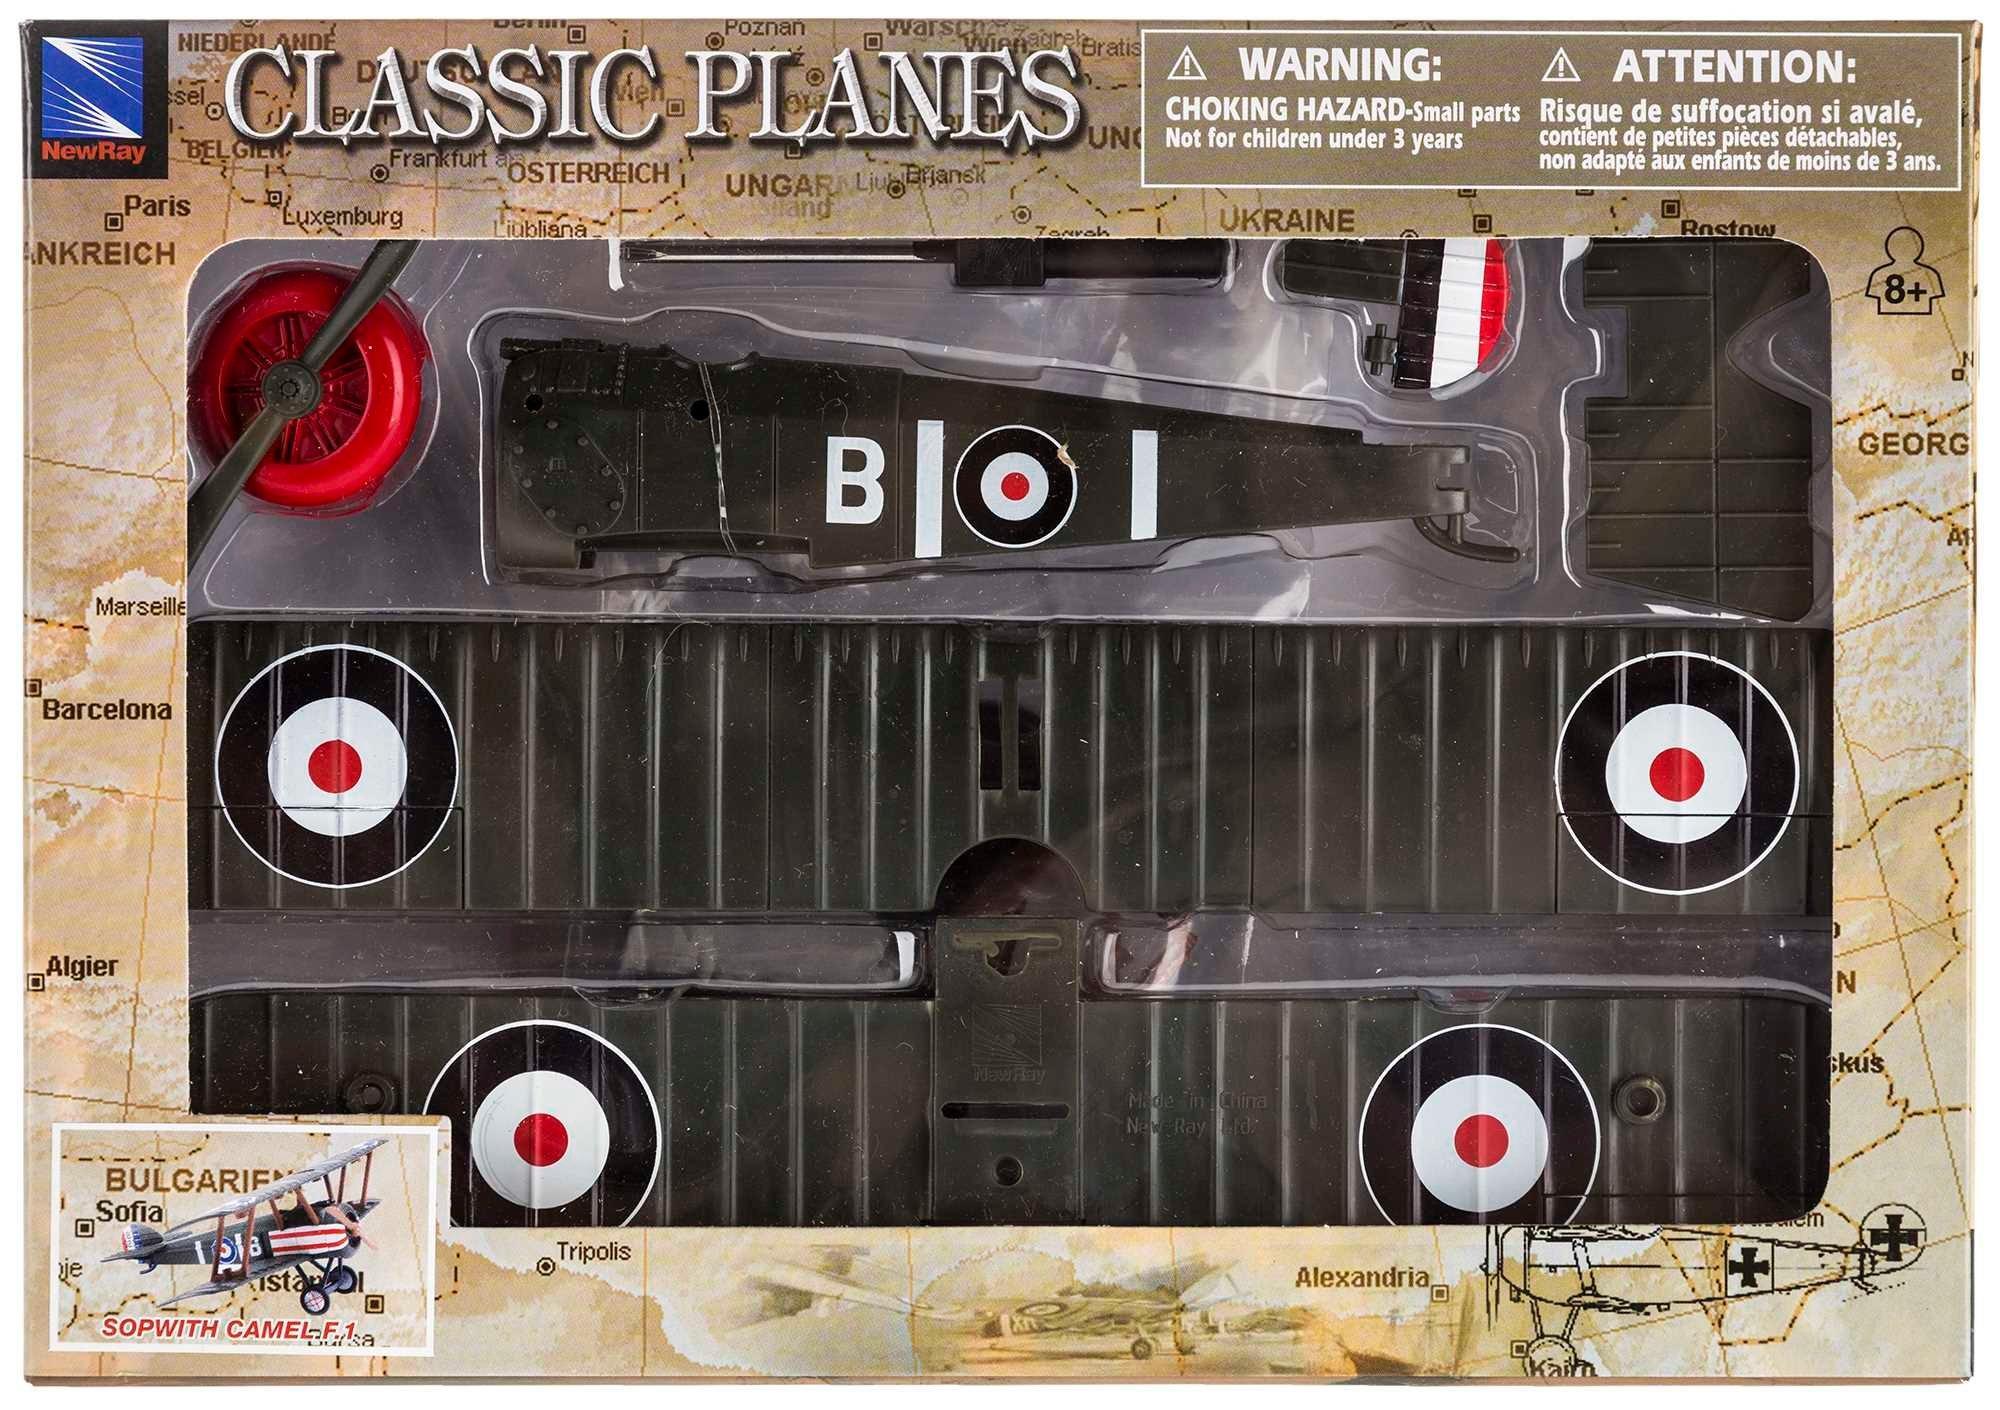 Hobby Lobby Rc Airplanes: RC Plane Kits for Hobbyists